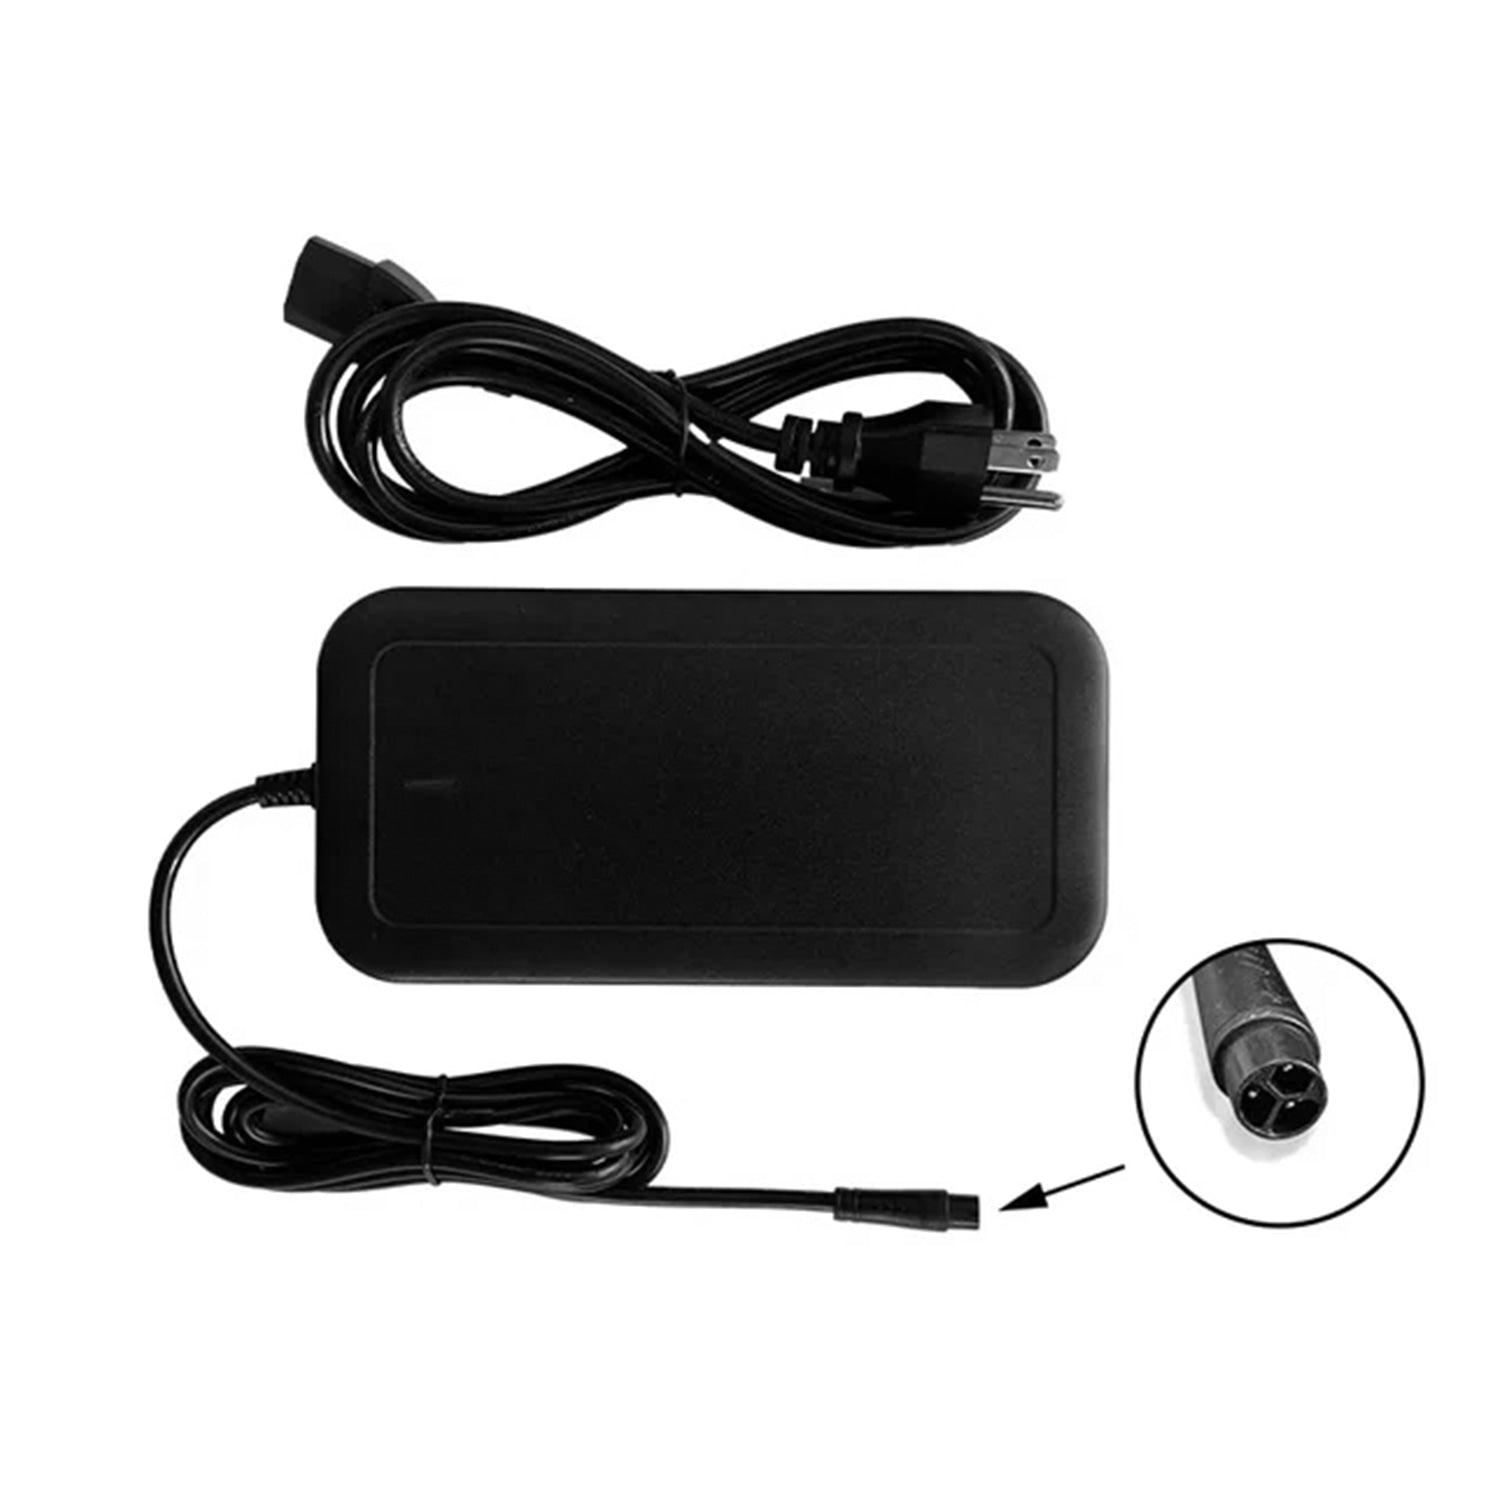 Fast Electric Bike Charger with Aviation Connector - 4.5A Double the Fast Charging Speed - UL Listed